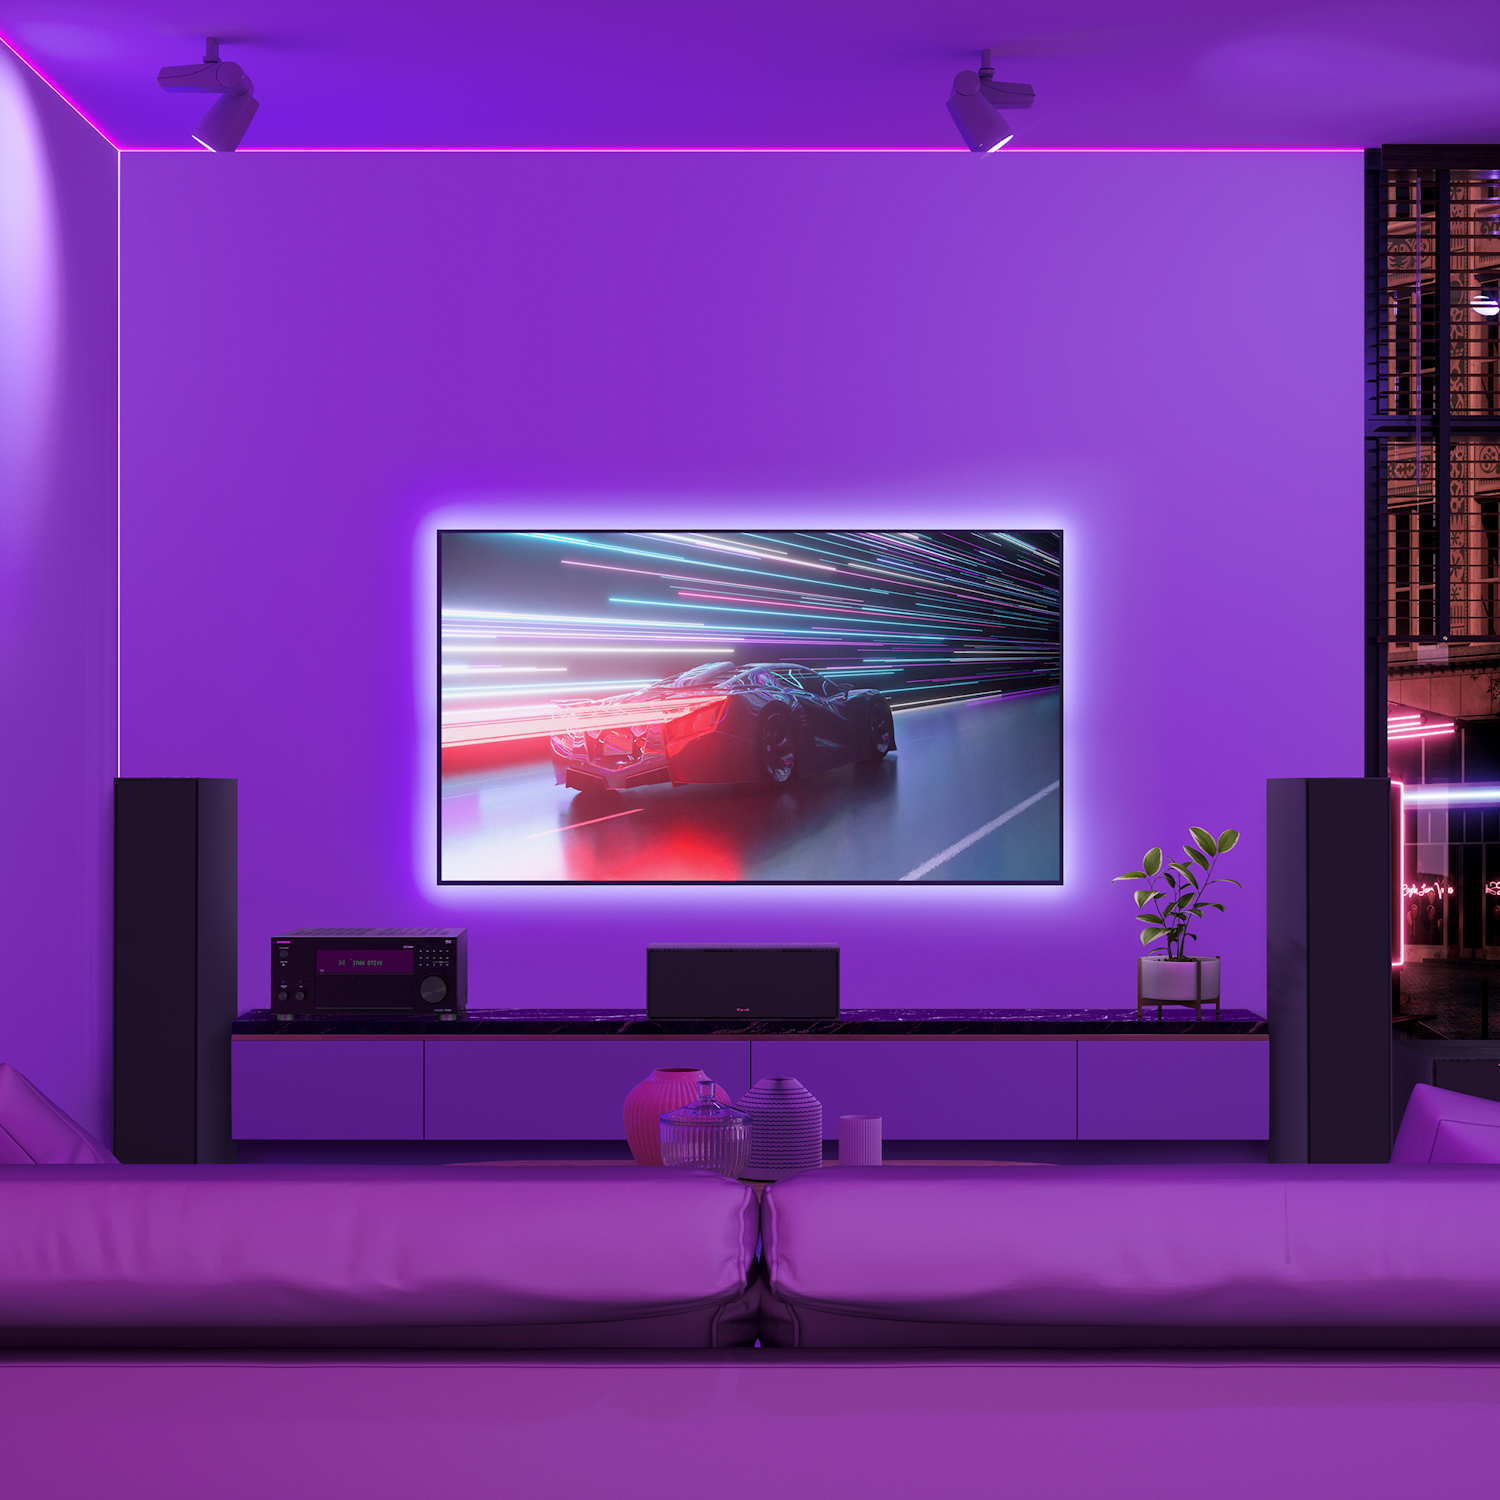 TX RZ70 and Klipsch Home Theater System in Purple LED Lit High Rise Condo 2000x2000